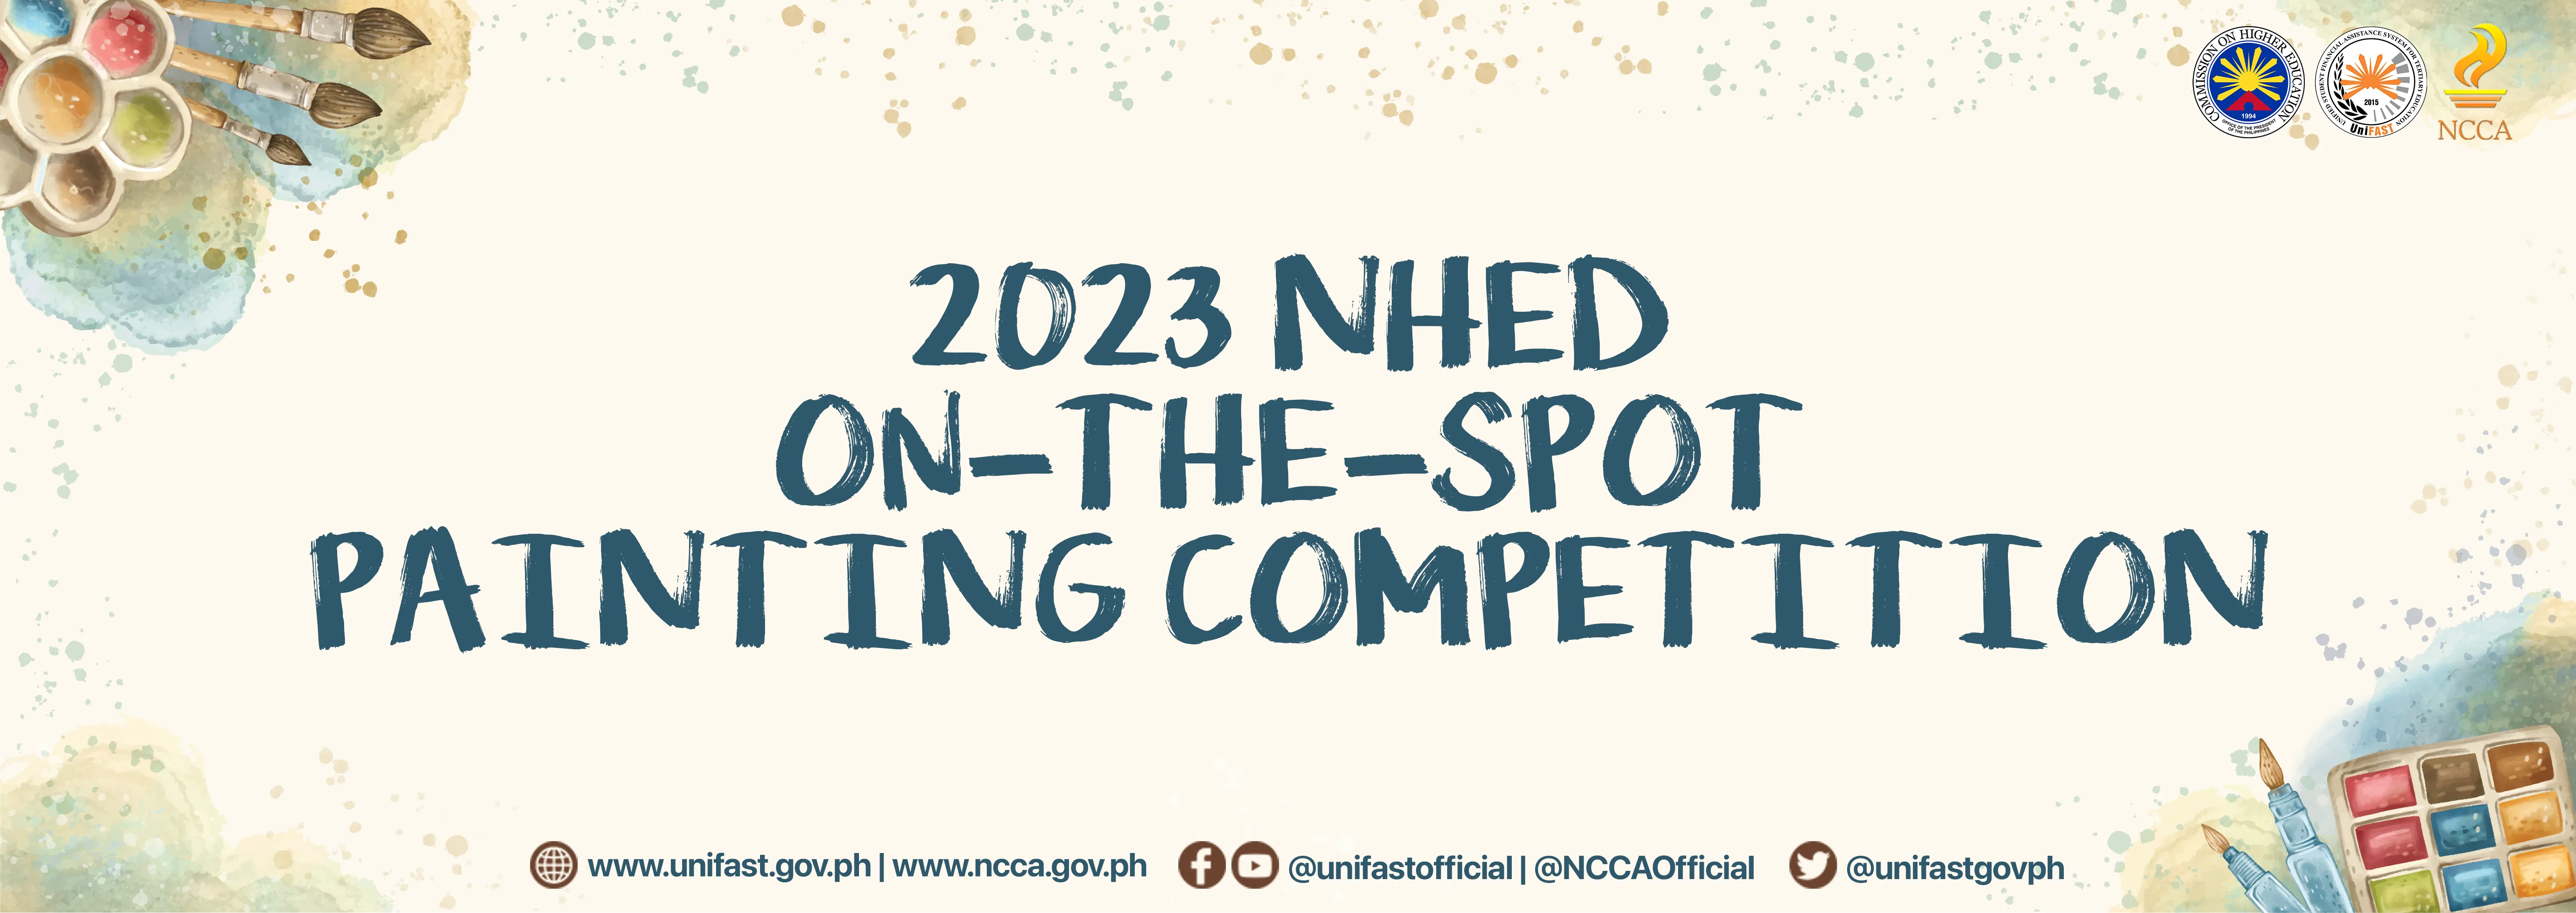 2023 NHED Painting Competition